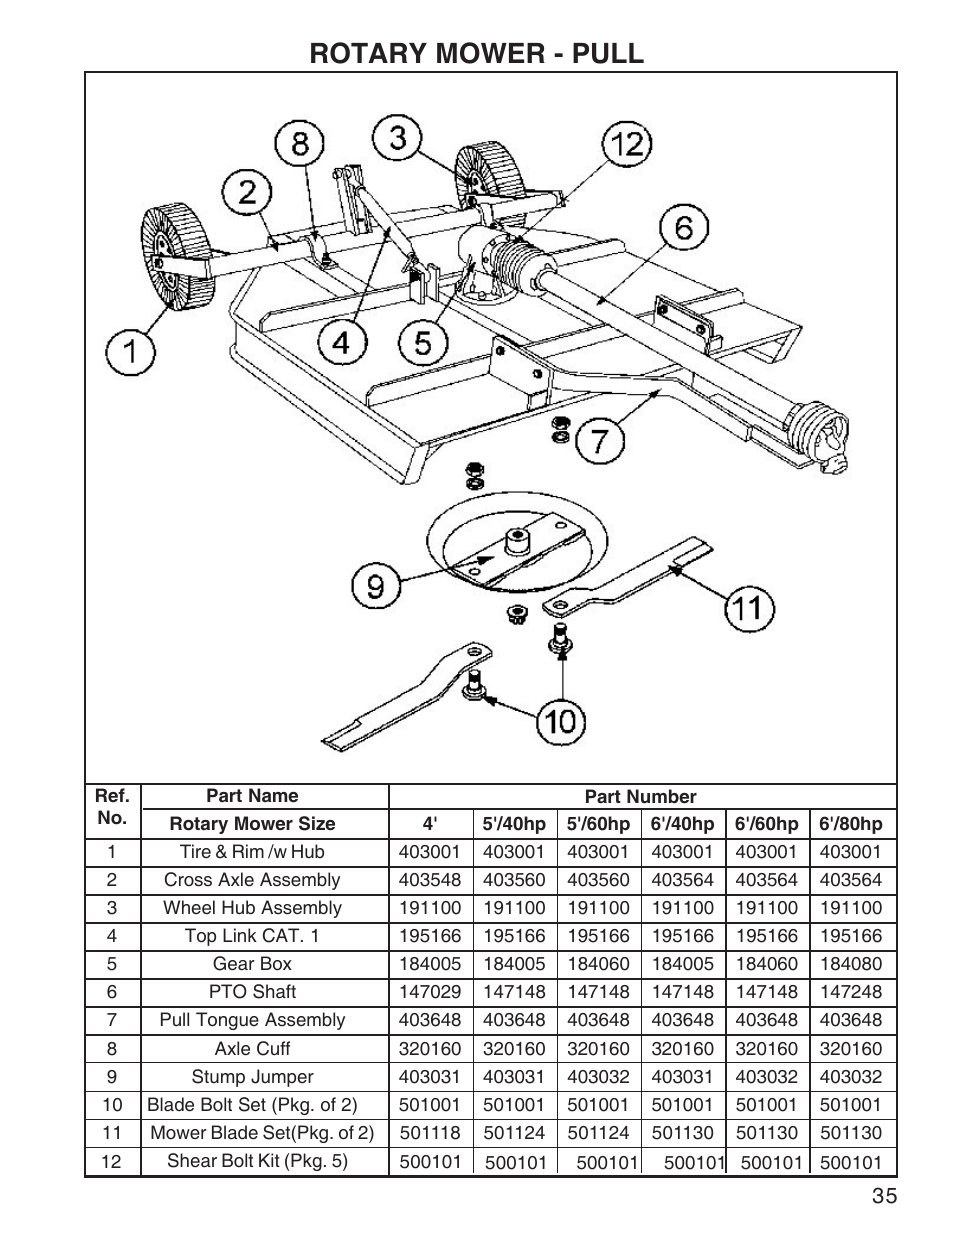 Rotary mower - pull | King Kutter Rotary Mower User Manual | Page 35 / 46